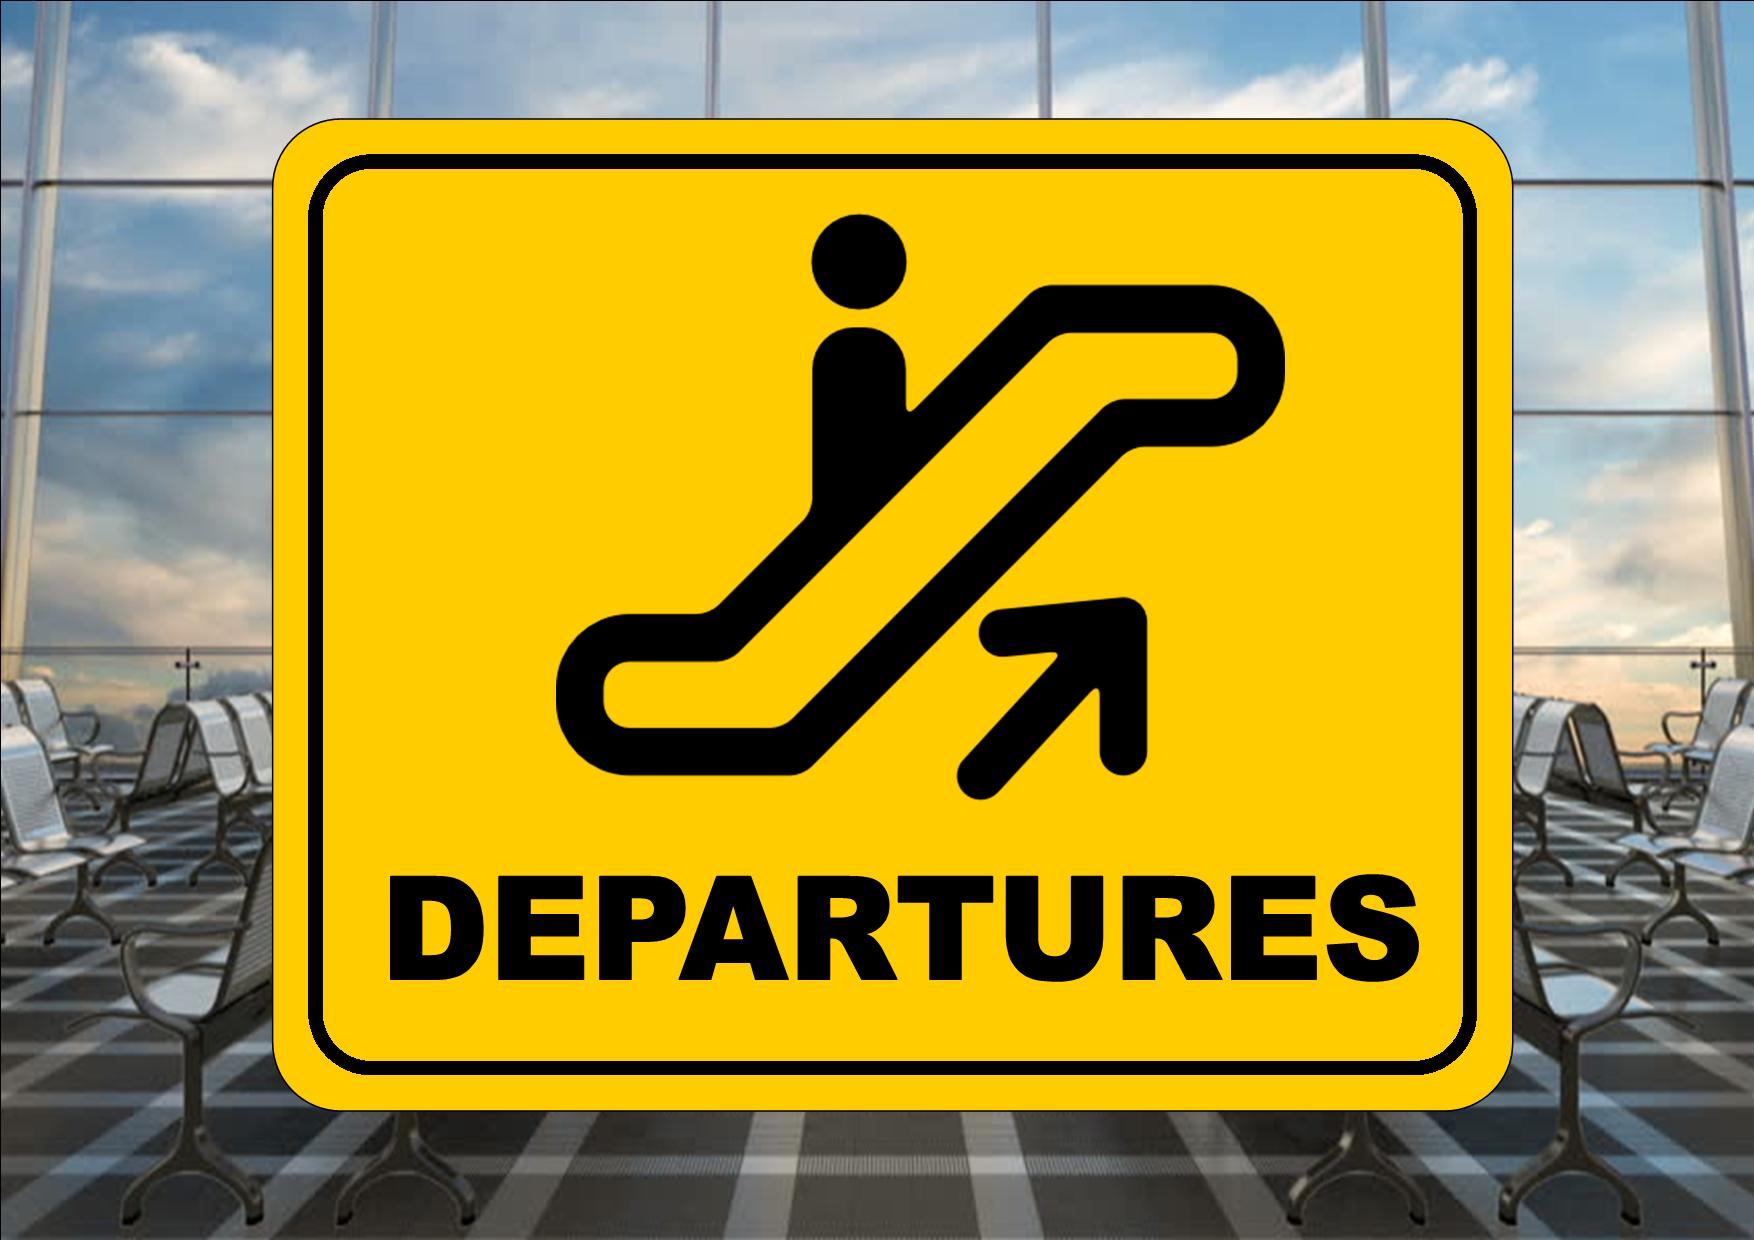 Departures Airport Novelty Arrivals Signs Hen & Stag Airport Reproduction Sign 